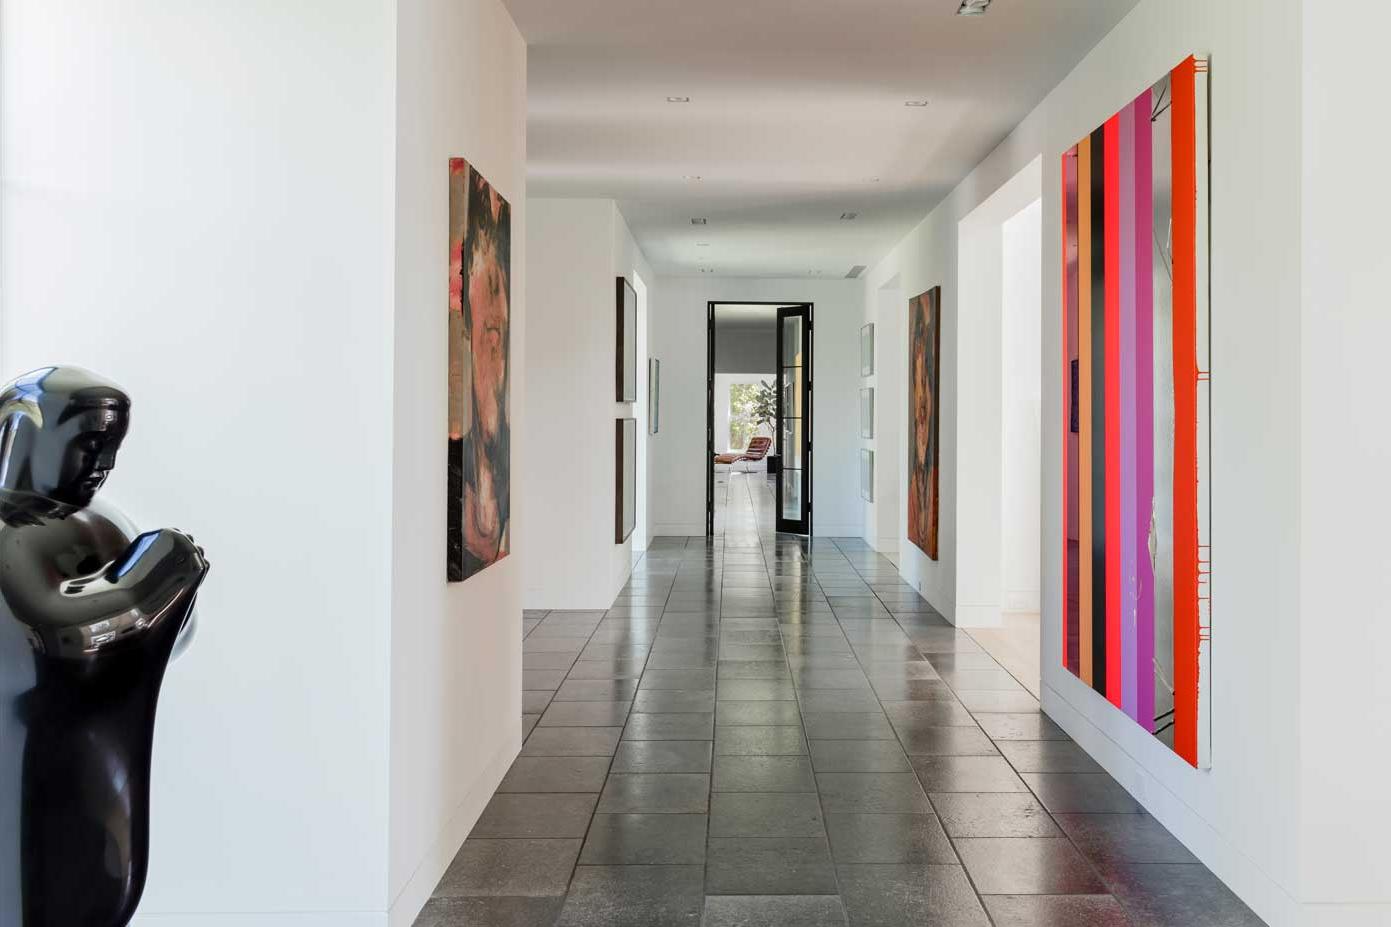 hallway with art along the walls